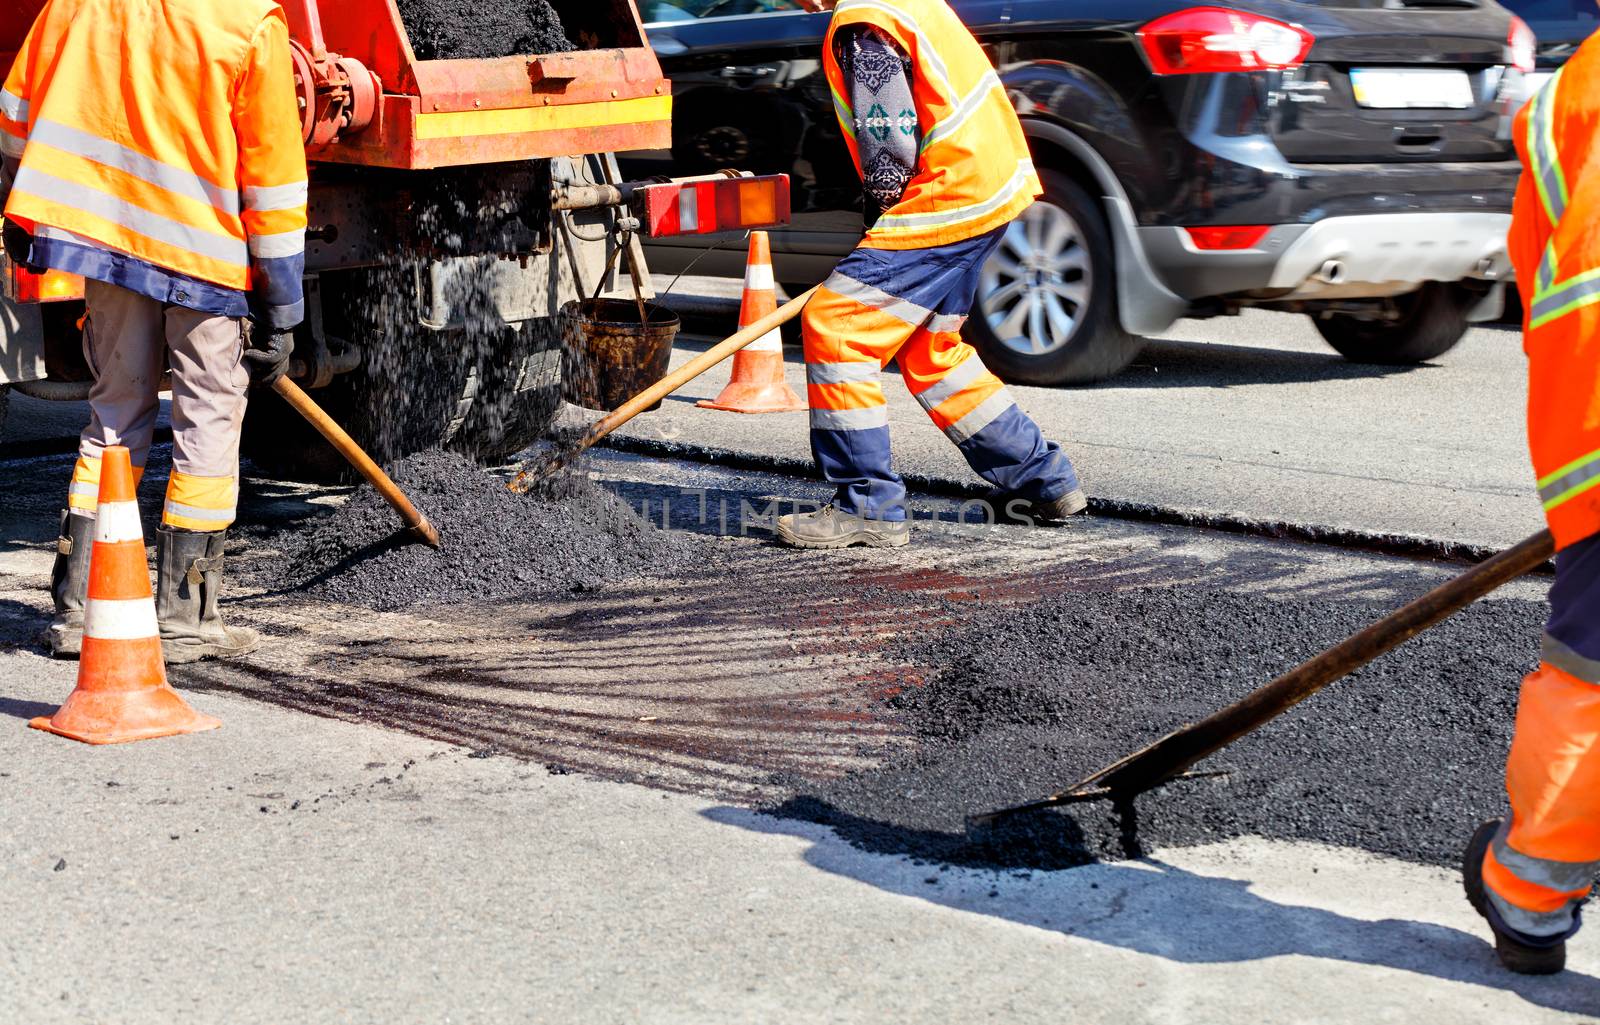 Working team levels the fresh asphalt with shovels on a repaired area in road construction. by Sergii